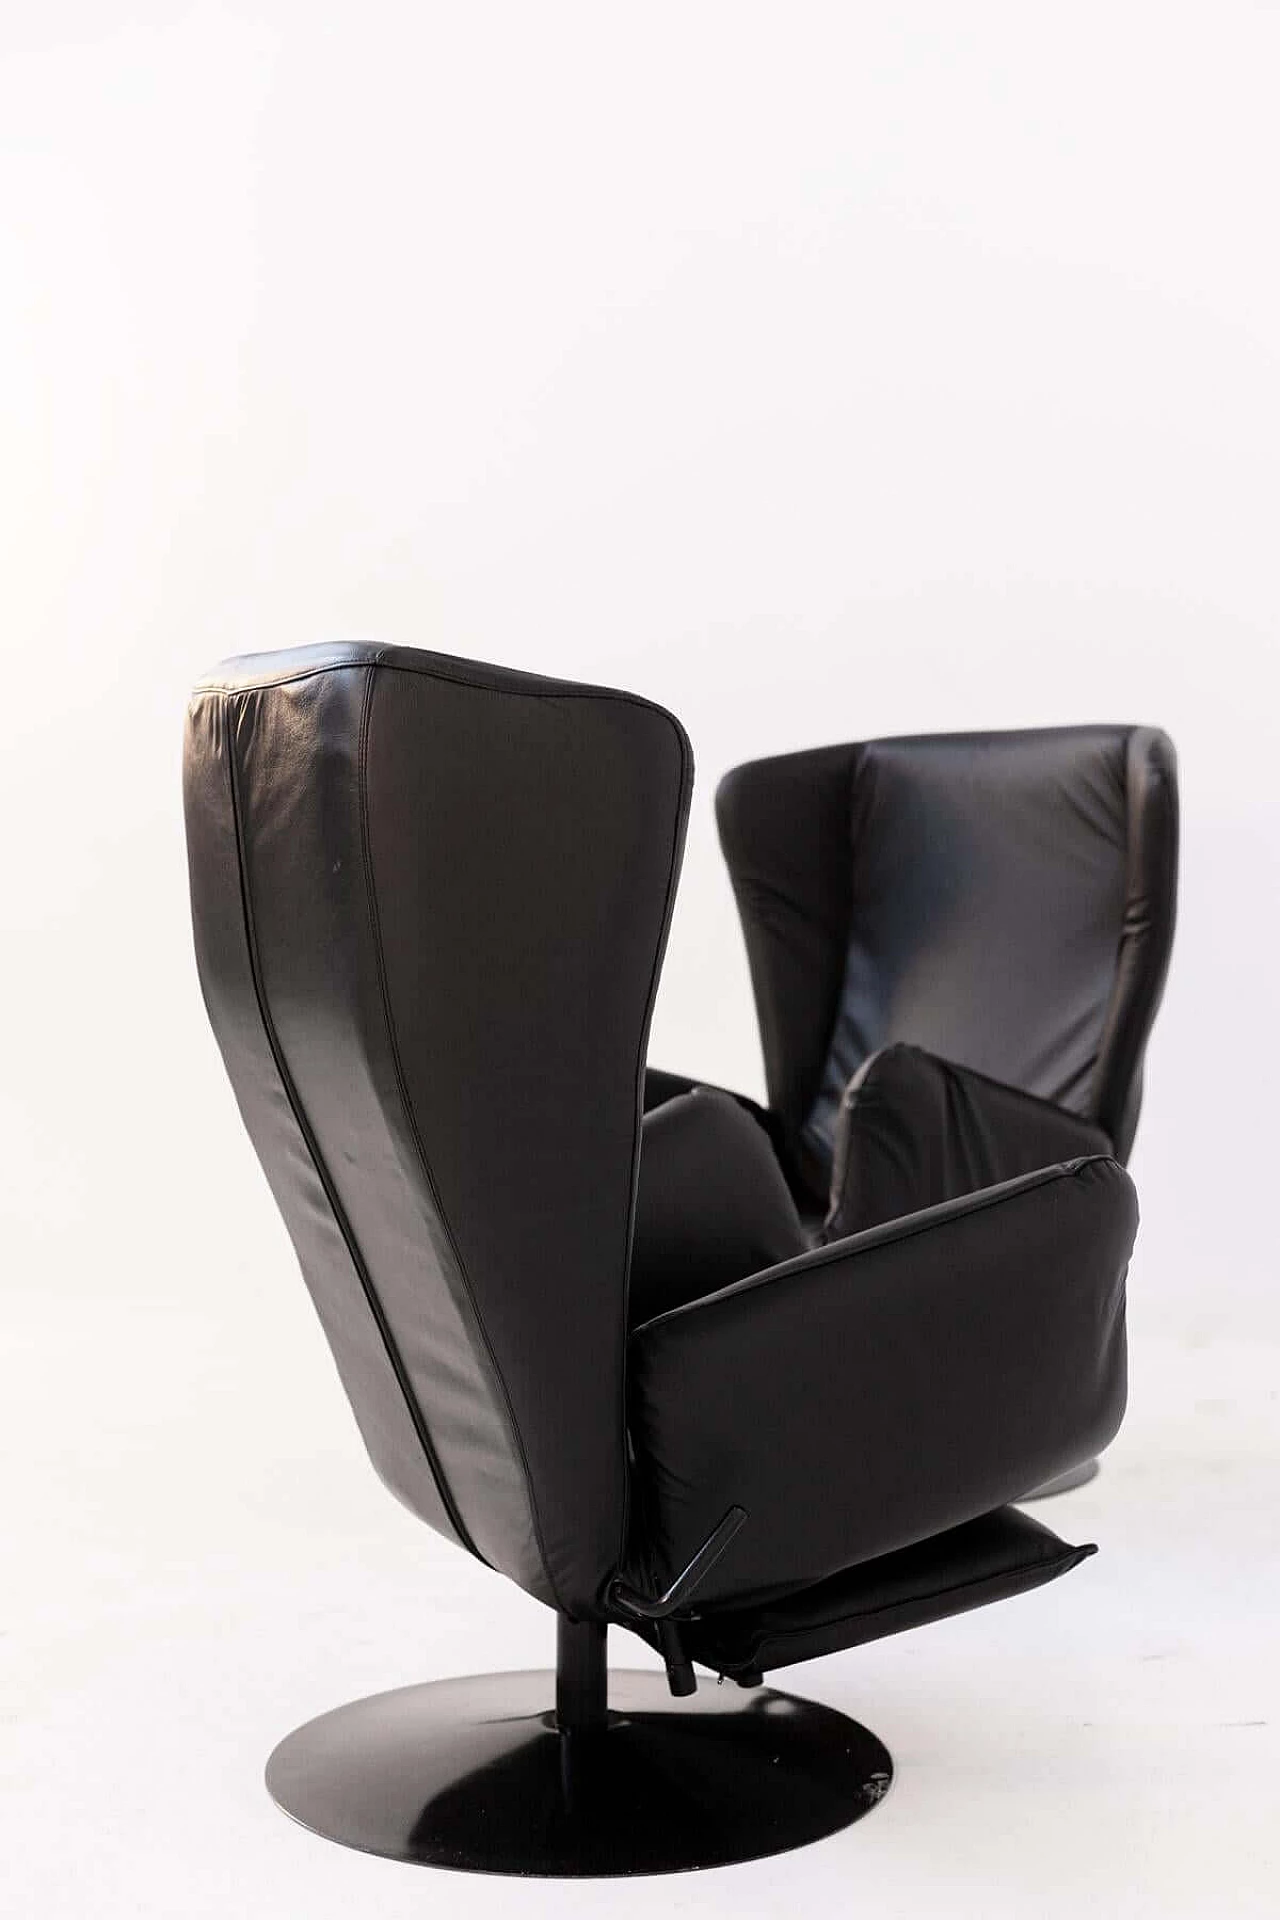 Pair of black leather armchairs with footrest cushion, 1970s 1405536